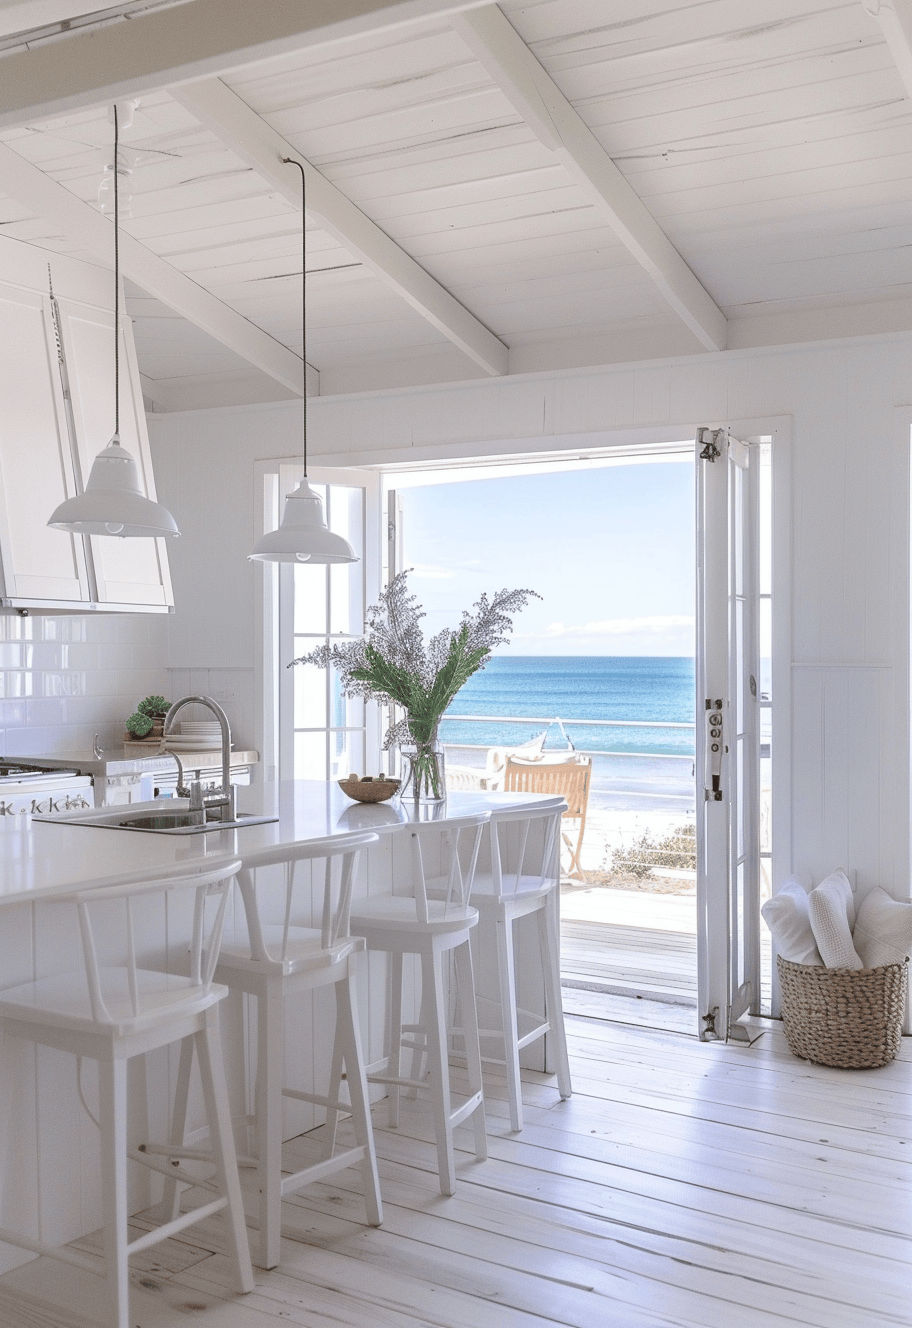 a Coastal Kitchen Windows/ Bright kitchen with large windows dressed in natural linen curtains